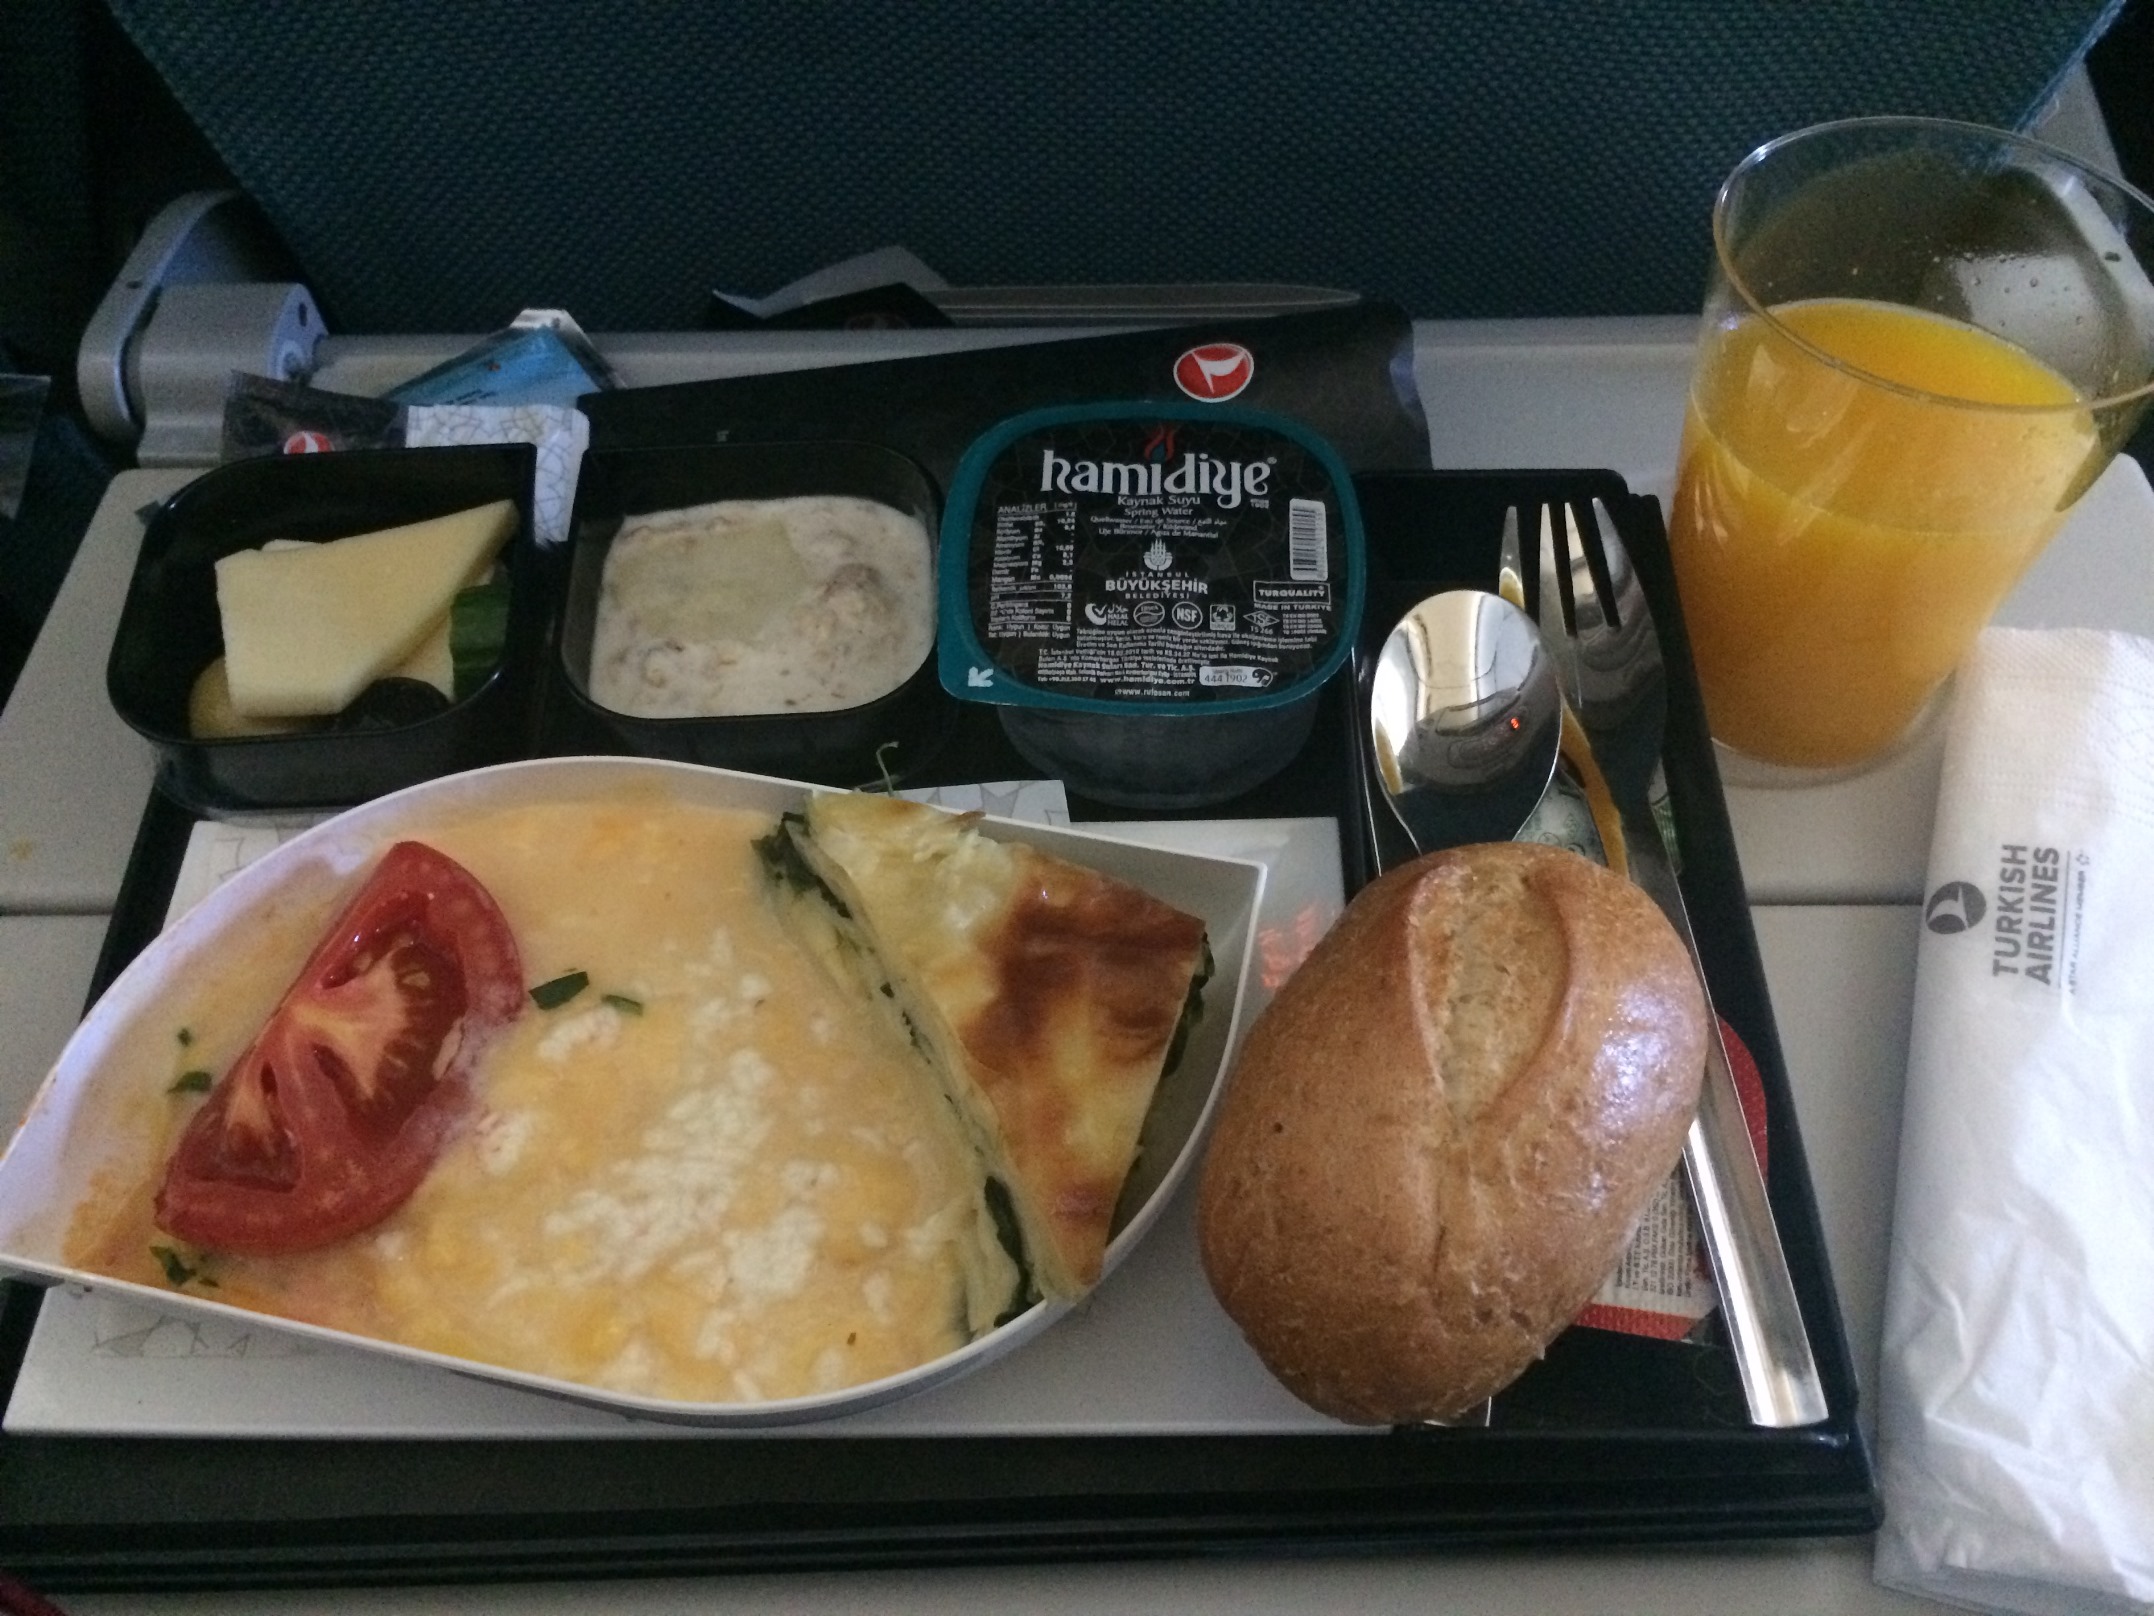 THY_Turkish-Airlines_inflight-meal_Istanbul-Paris_Economy-Class_Sep-2015_006